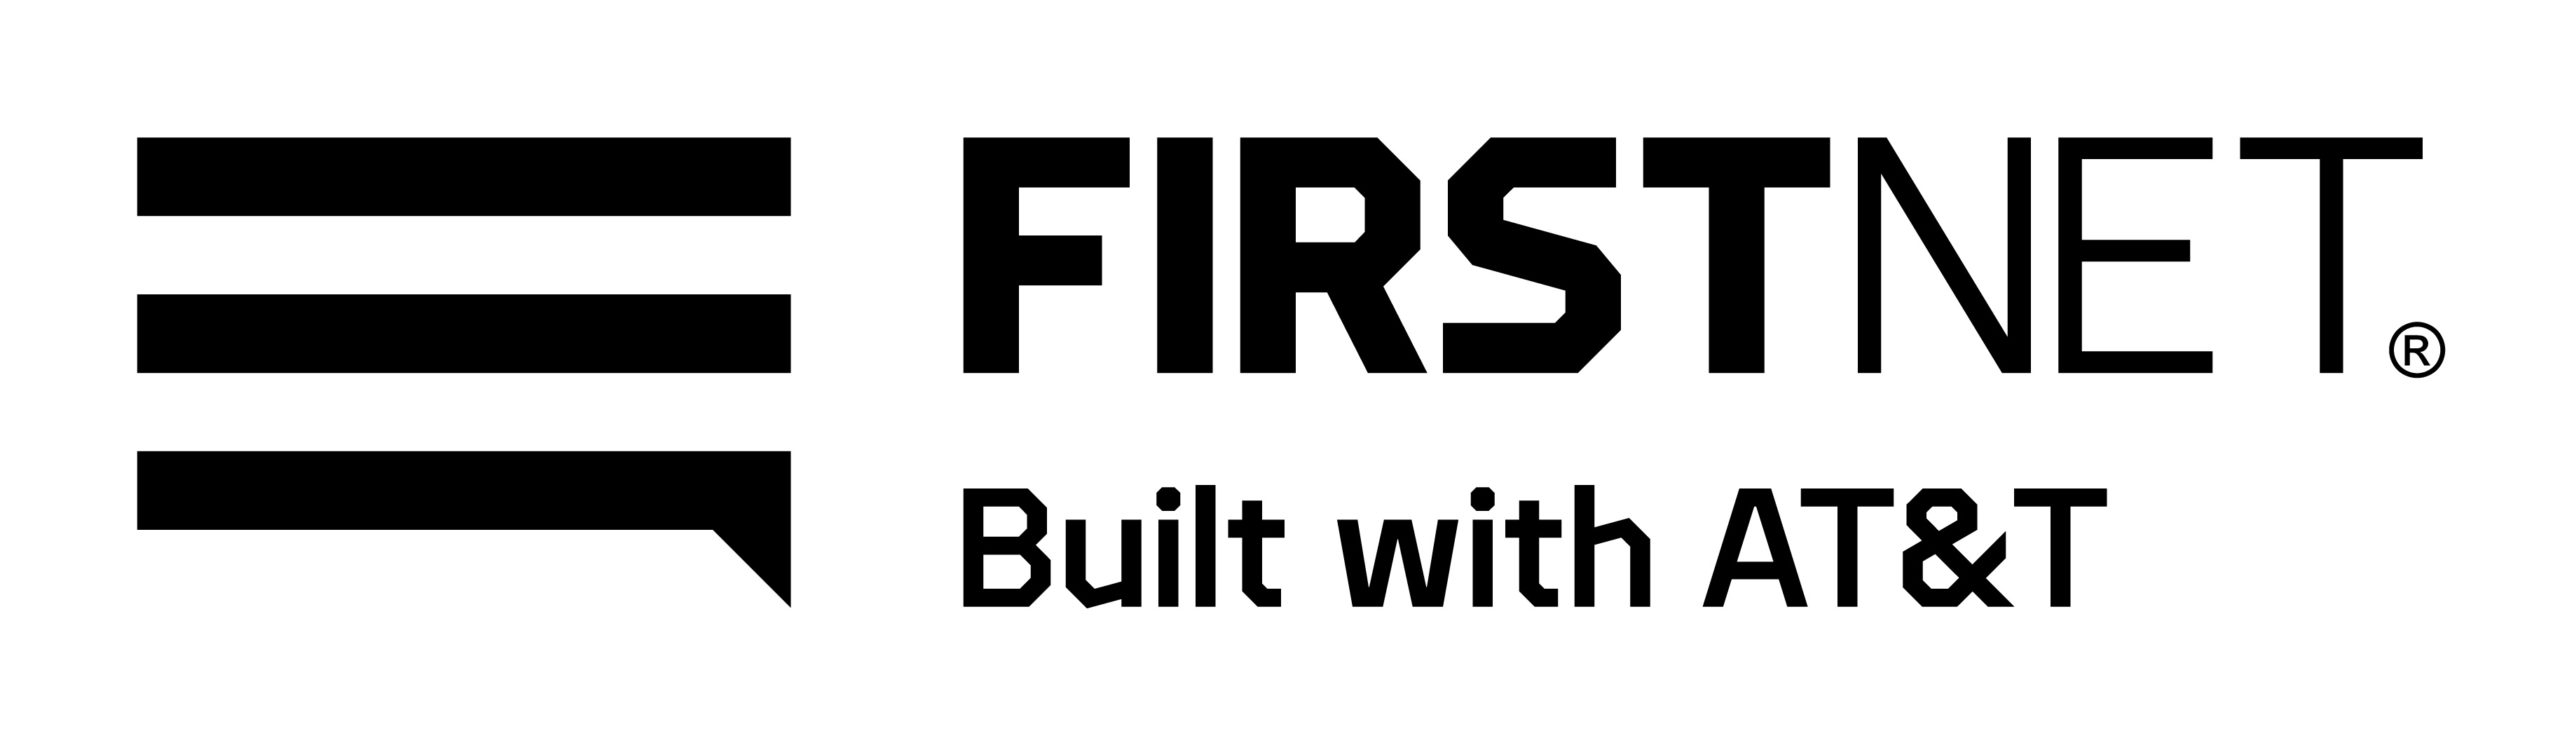 AT&T Firstnet